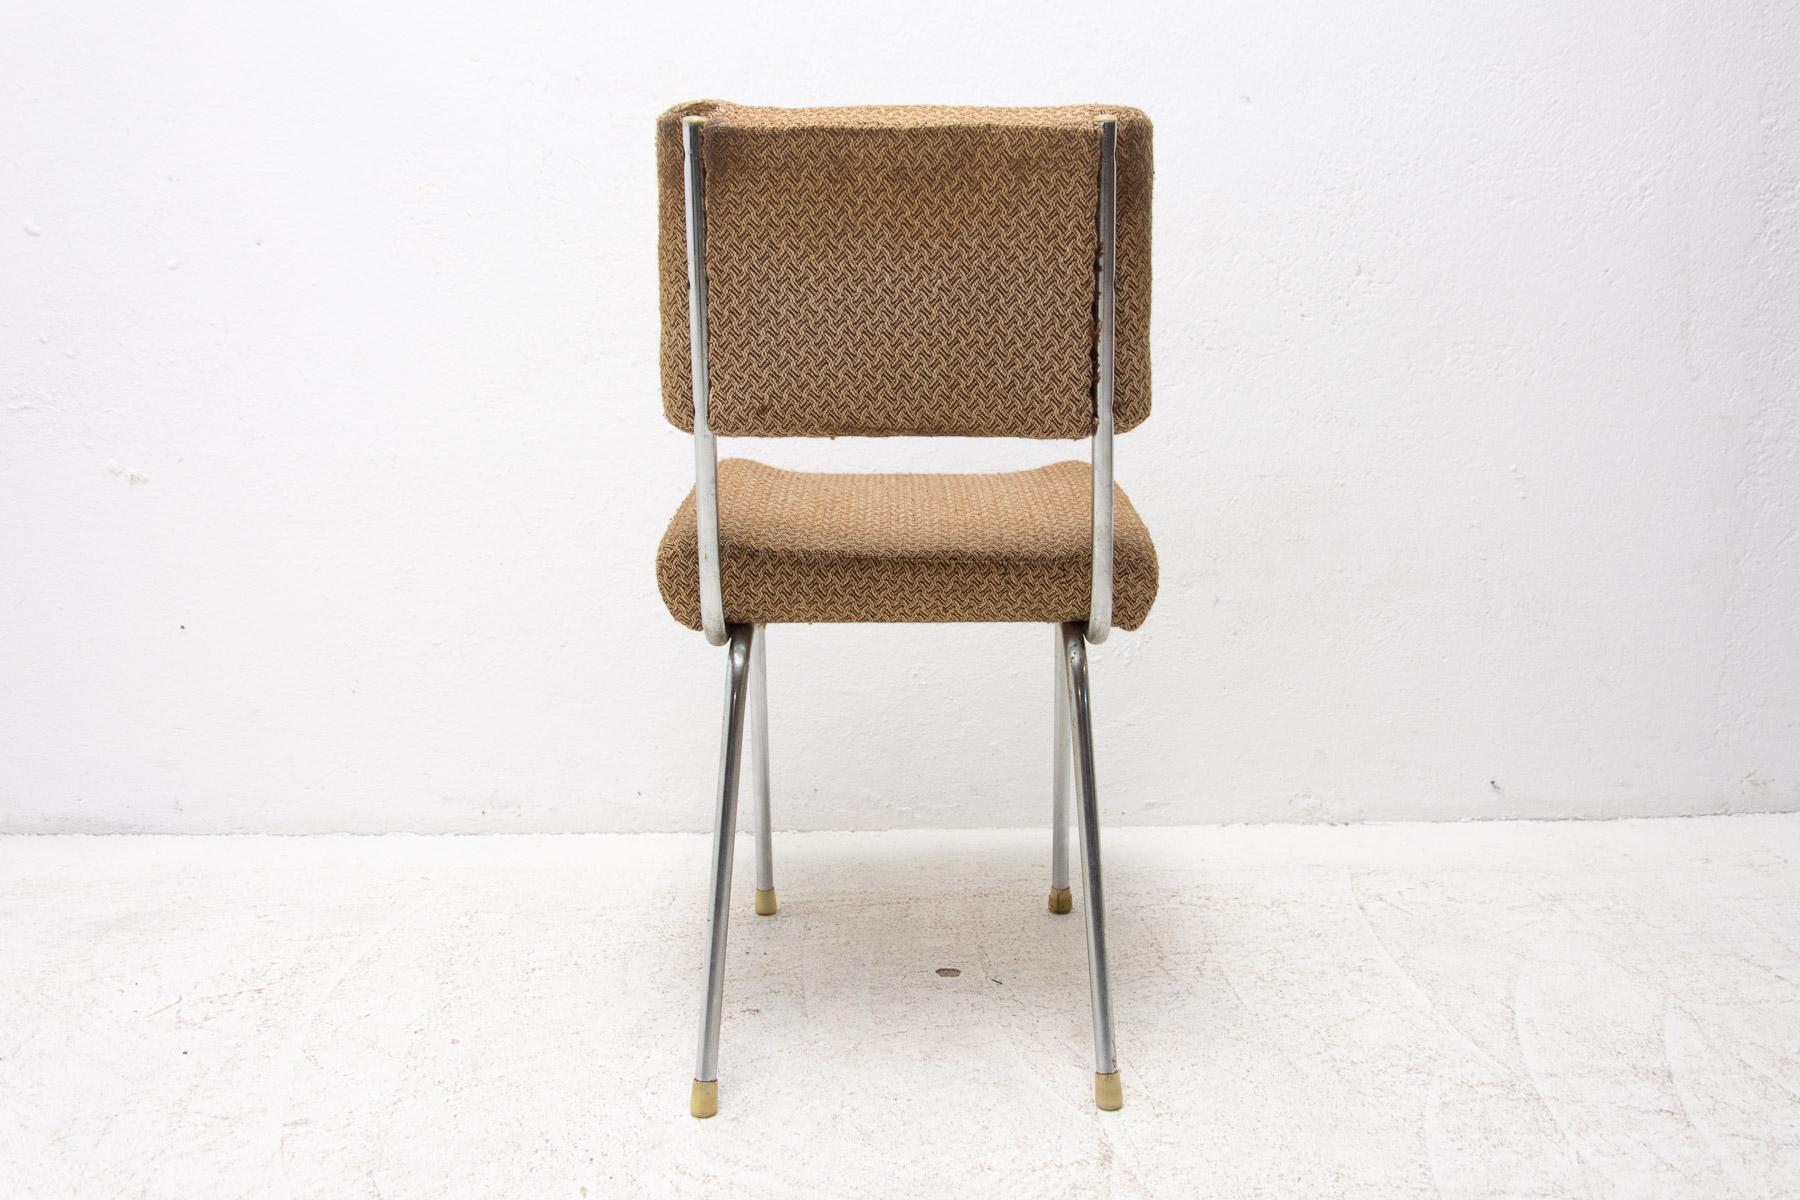 Eastern Bloc Midcentury Chromed Cafe Chairs, 1960's For Sale 10